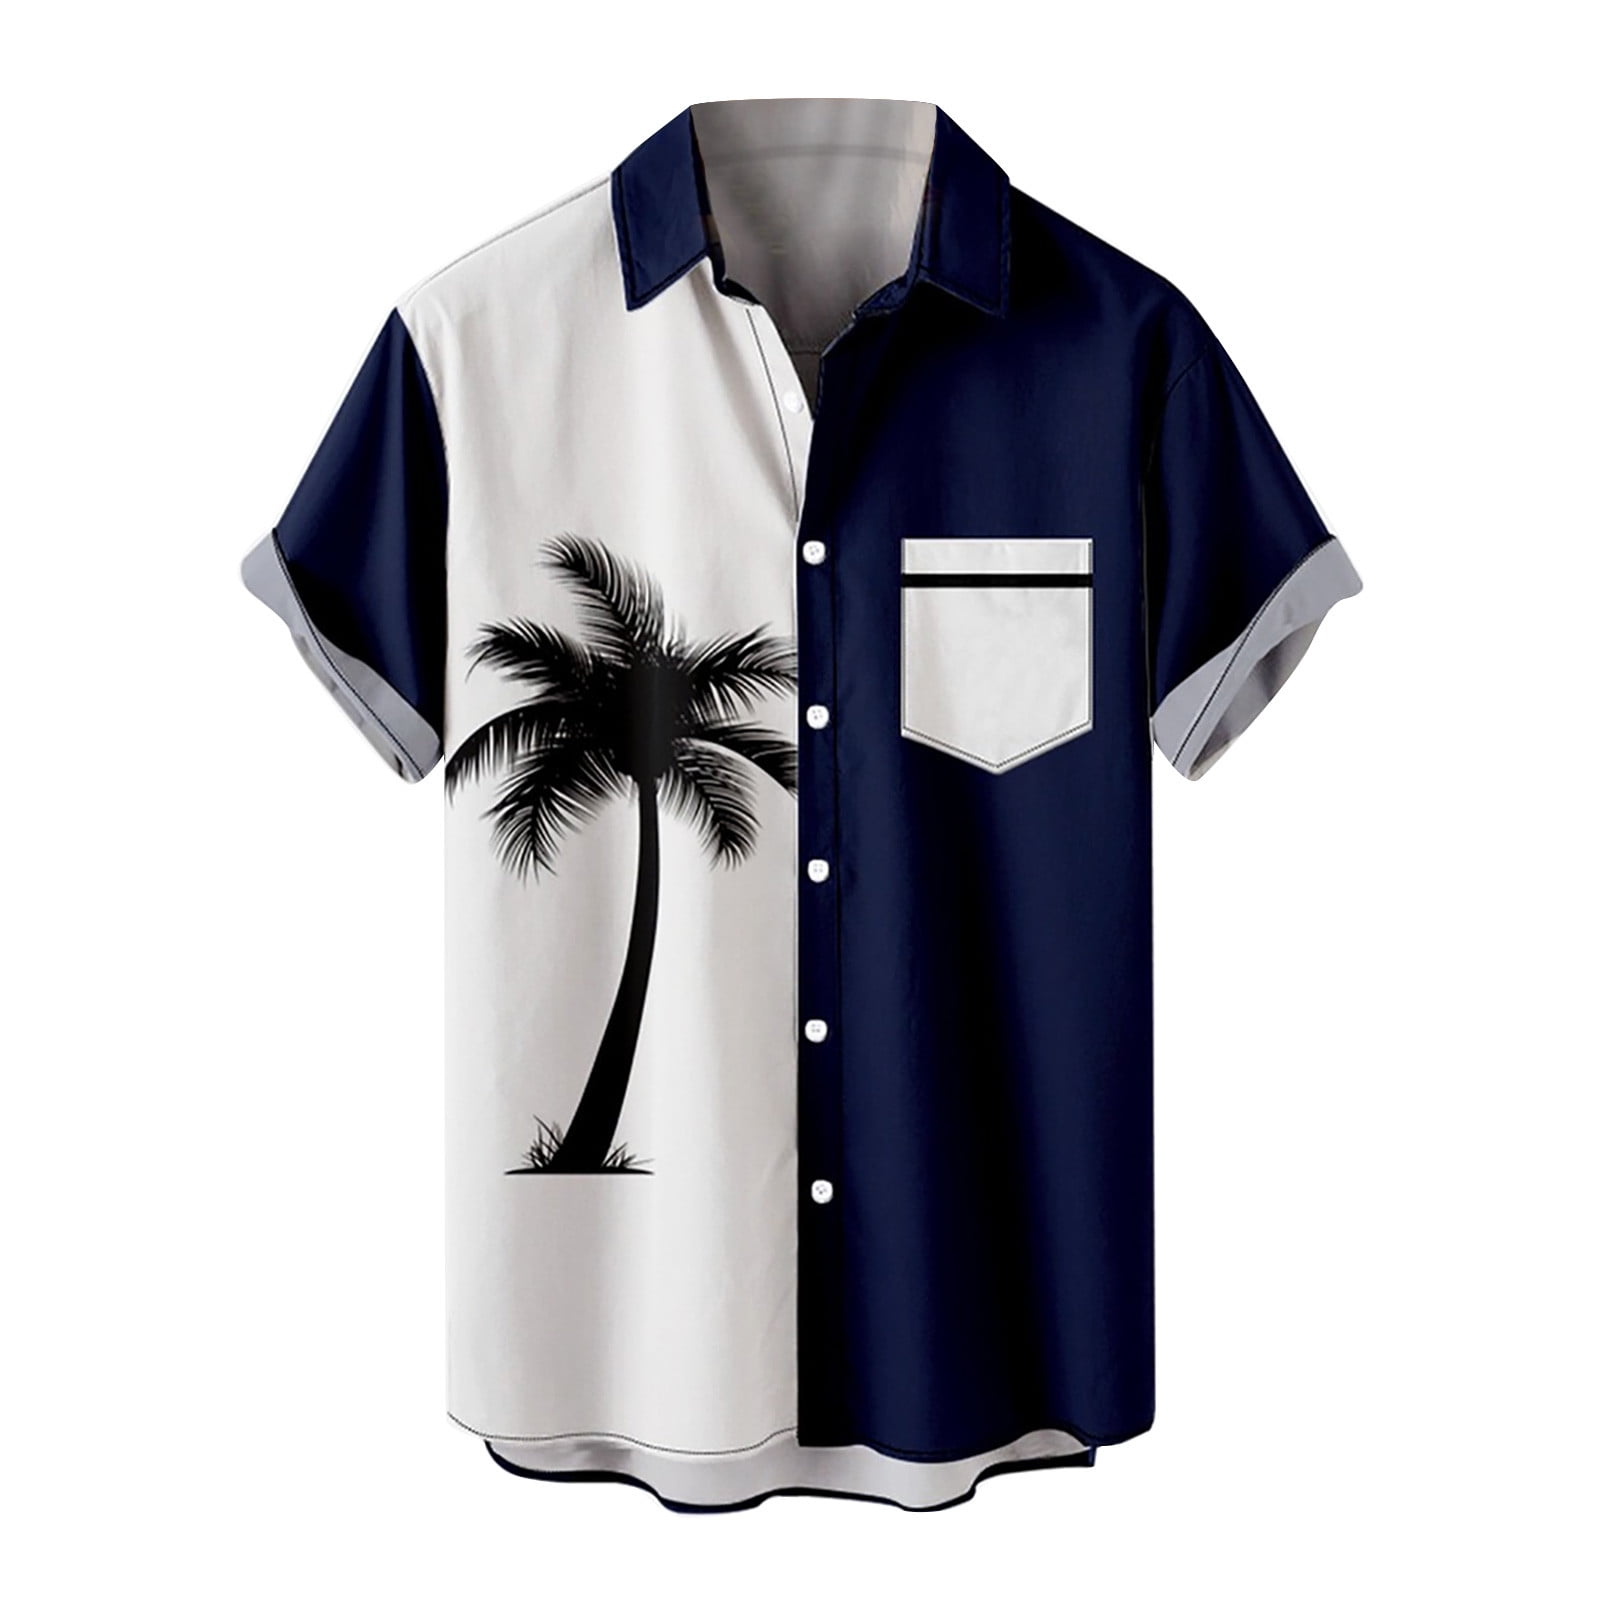 VSSSJ Shirts for Men Big and Tall Casual Button Down Short Sleeve Tropical  Palm Tree Graphic Collared Shirt with Pocket Cozy Summer Hawaiian Tops  Green XXL 